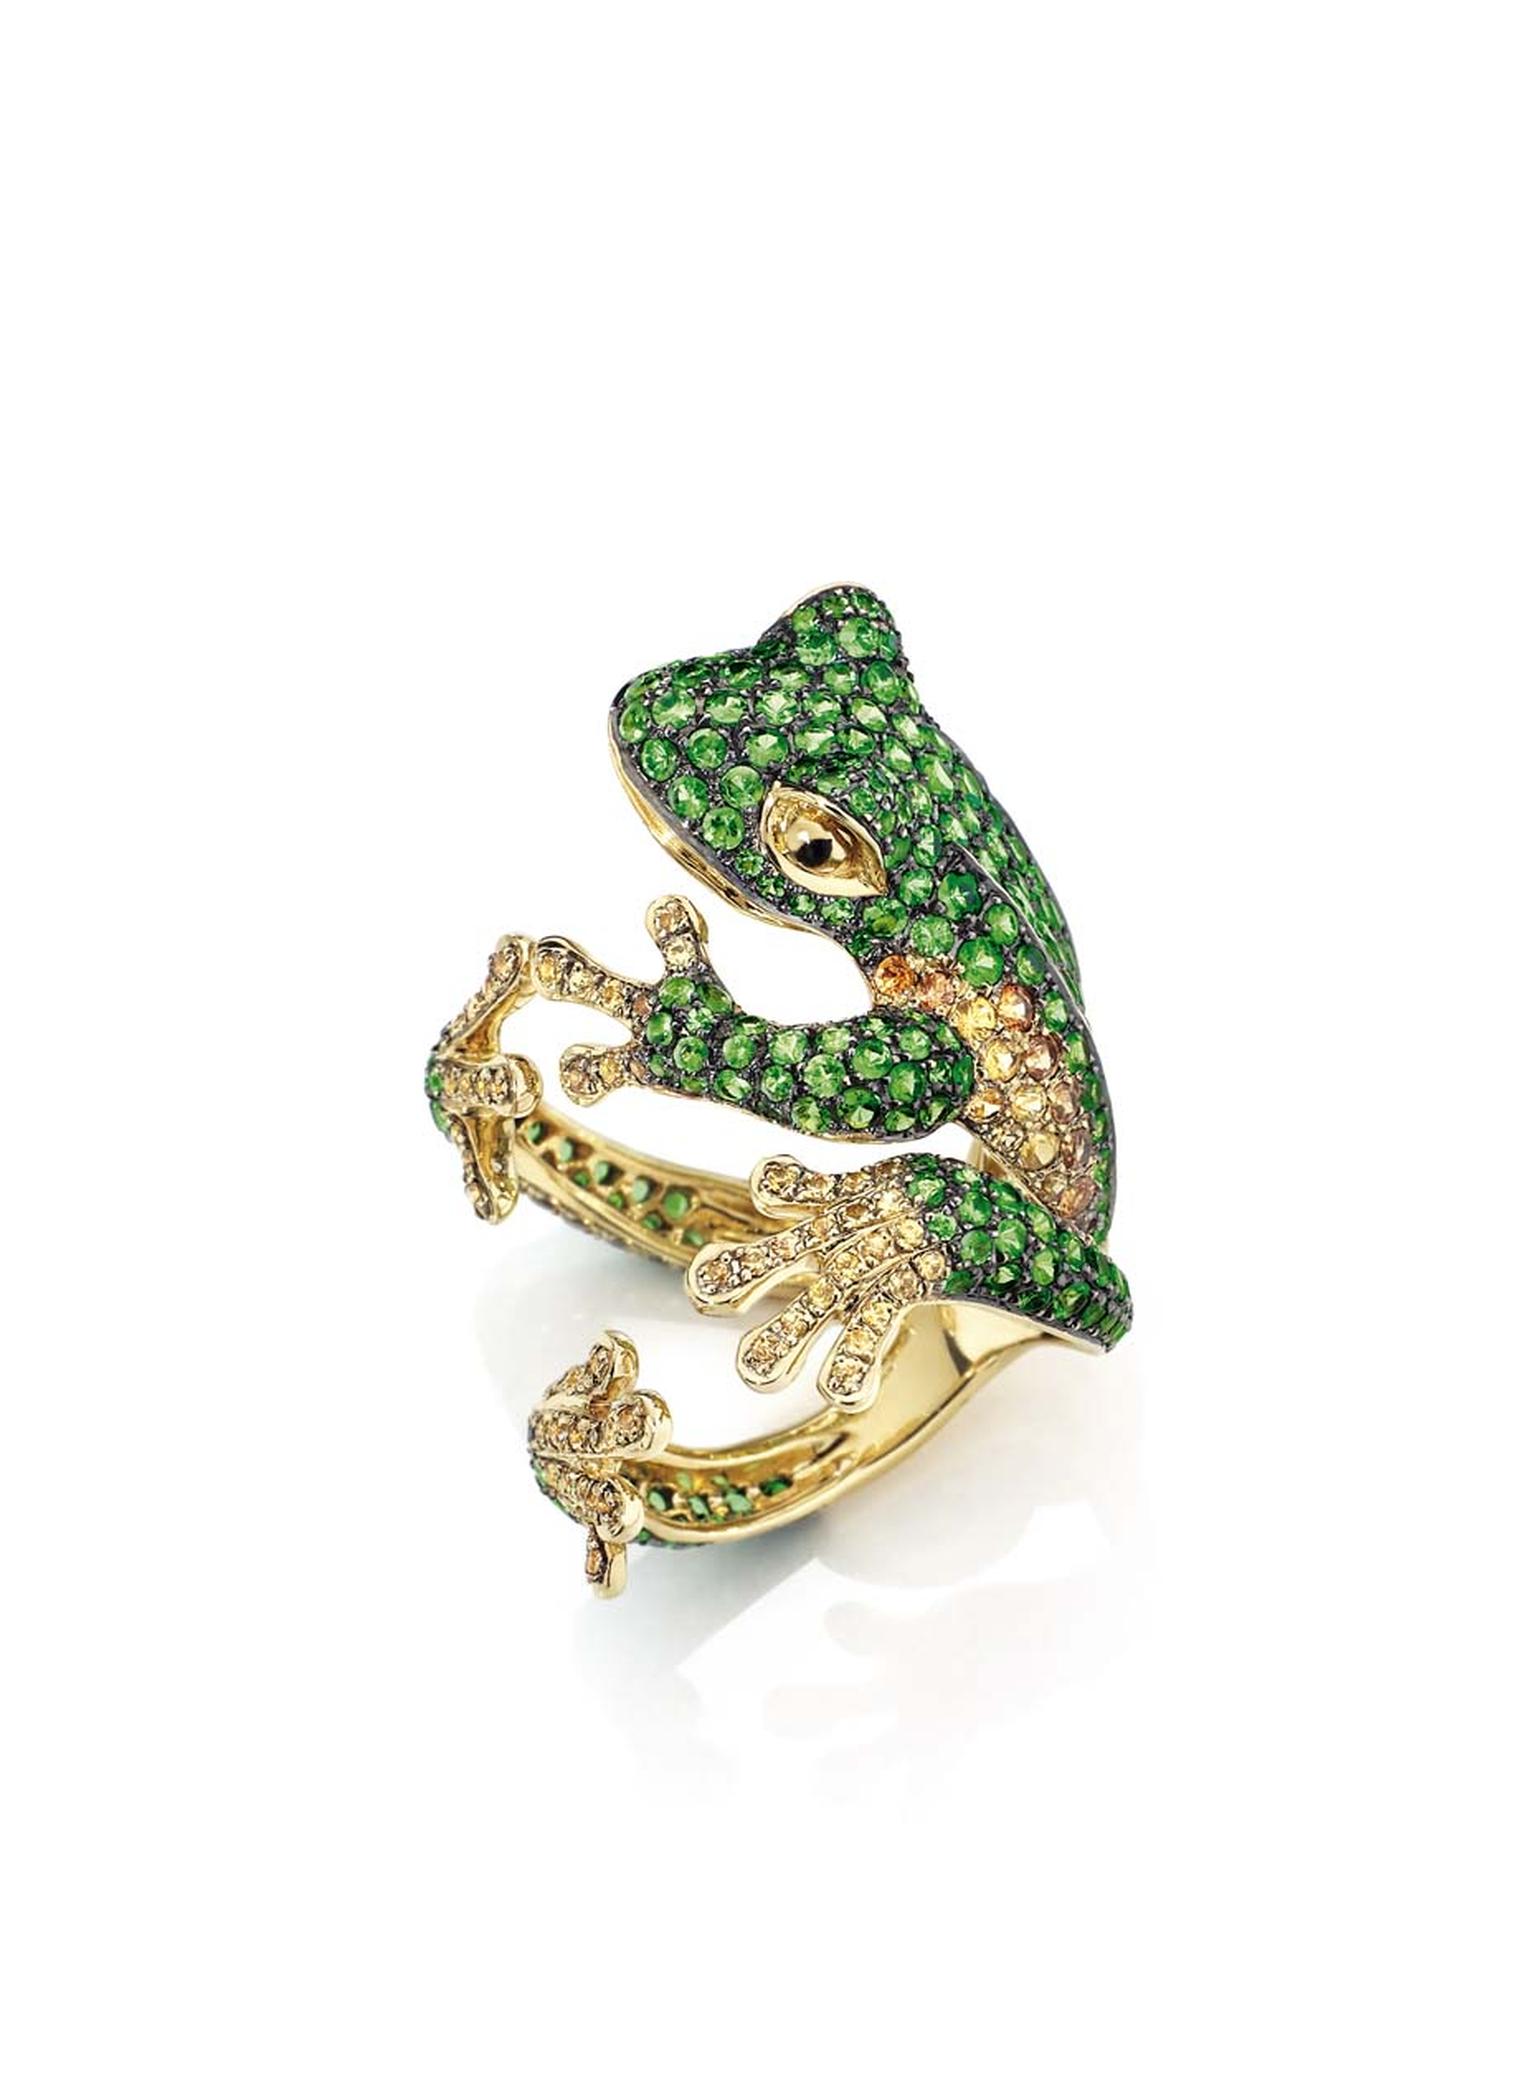 This Morphée Reinette ring in yellow gold, with emeralds and yellow diamonds, perfectly hugs the finger as if a frog has just attached itself to the lucky wearer.